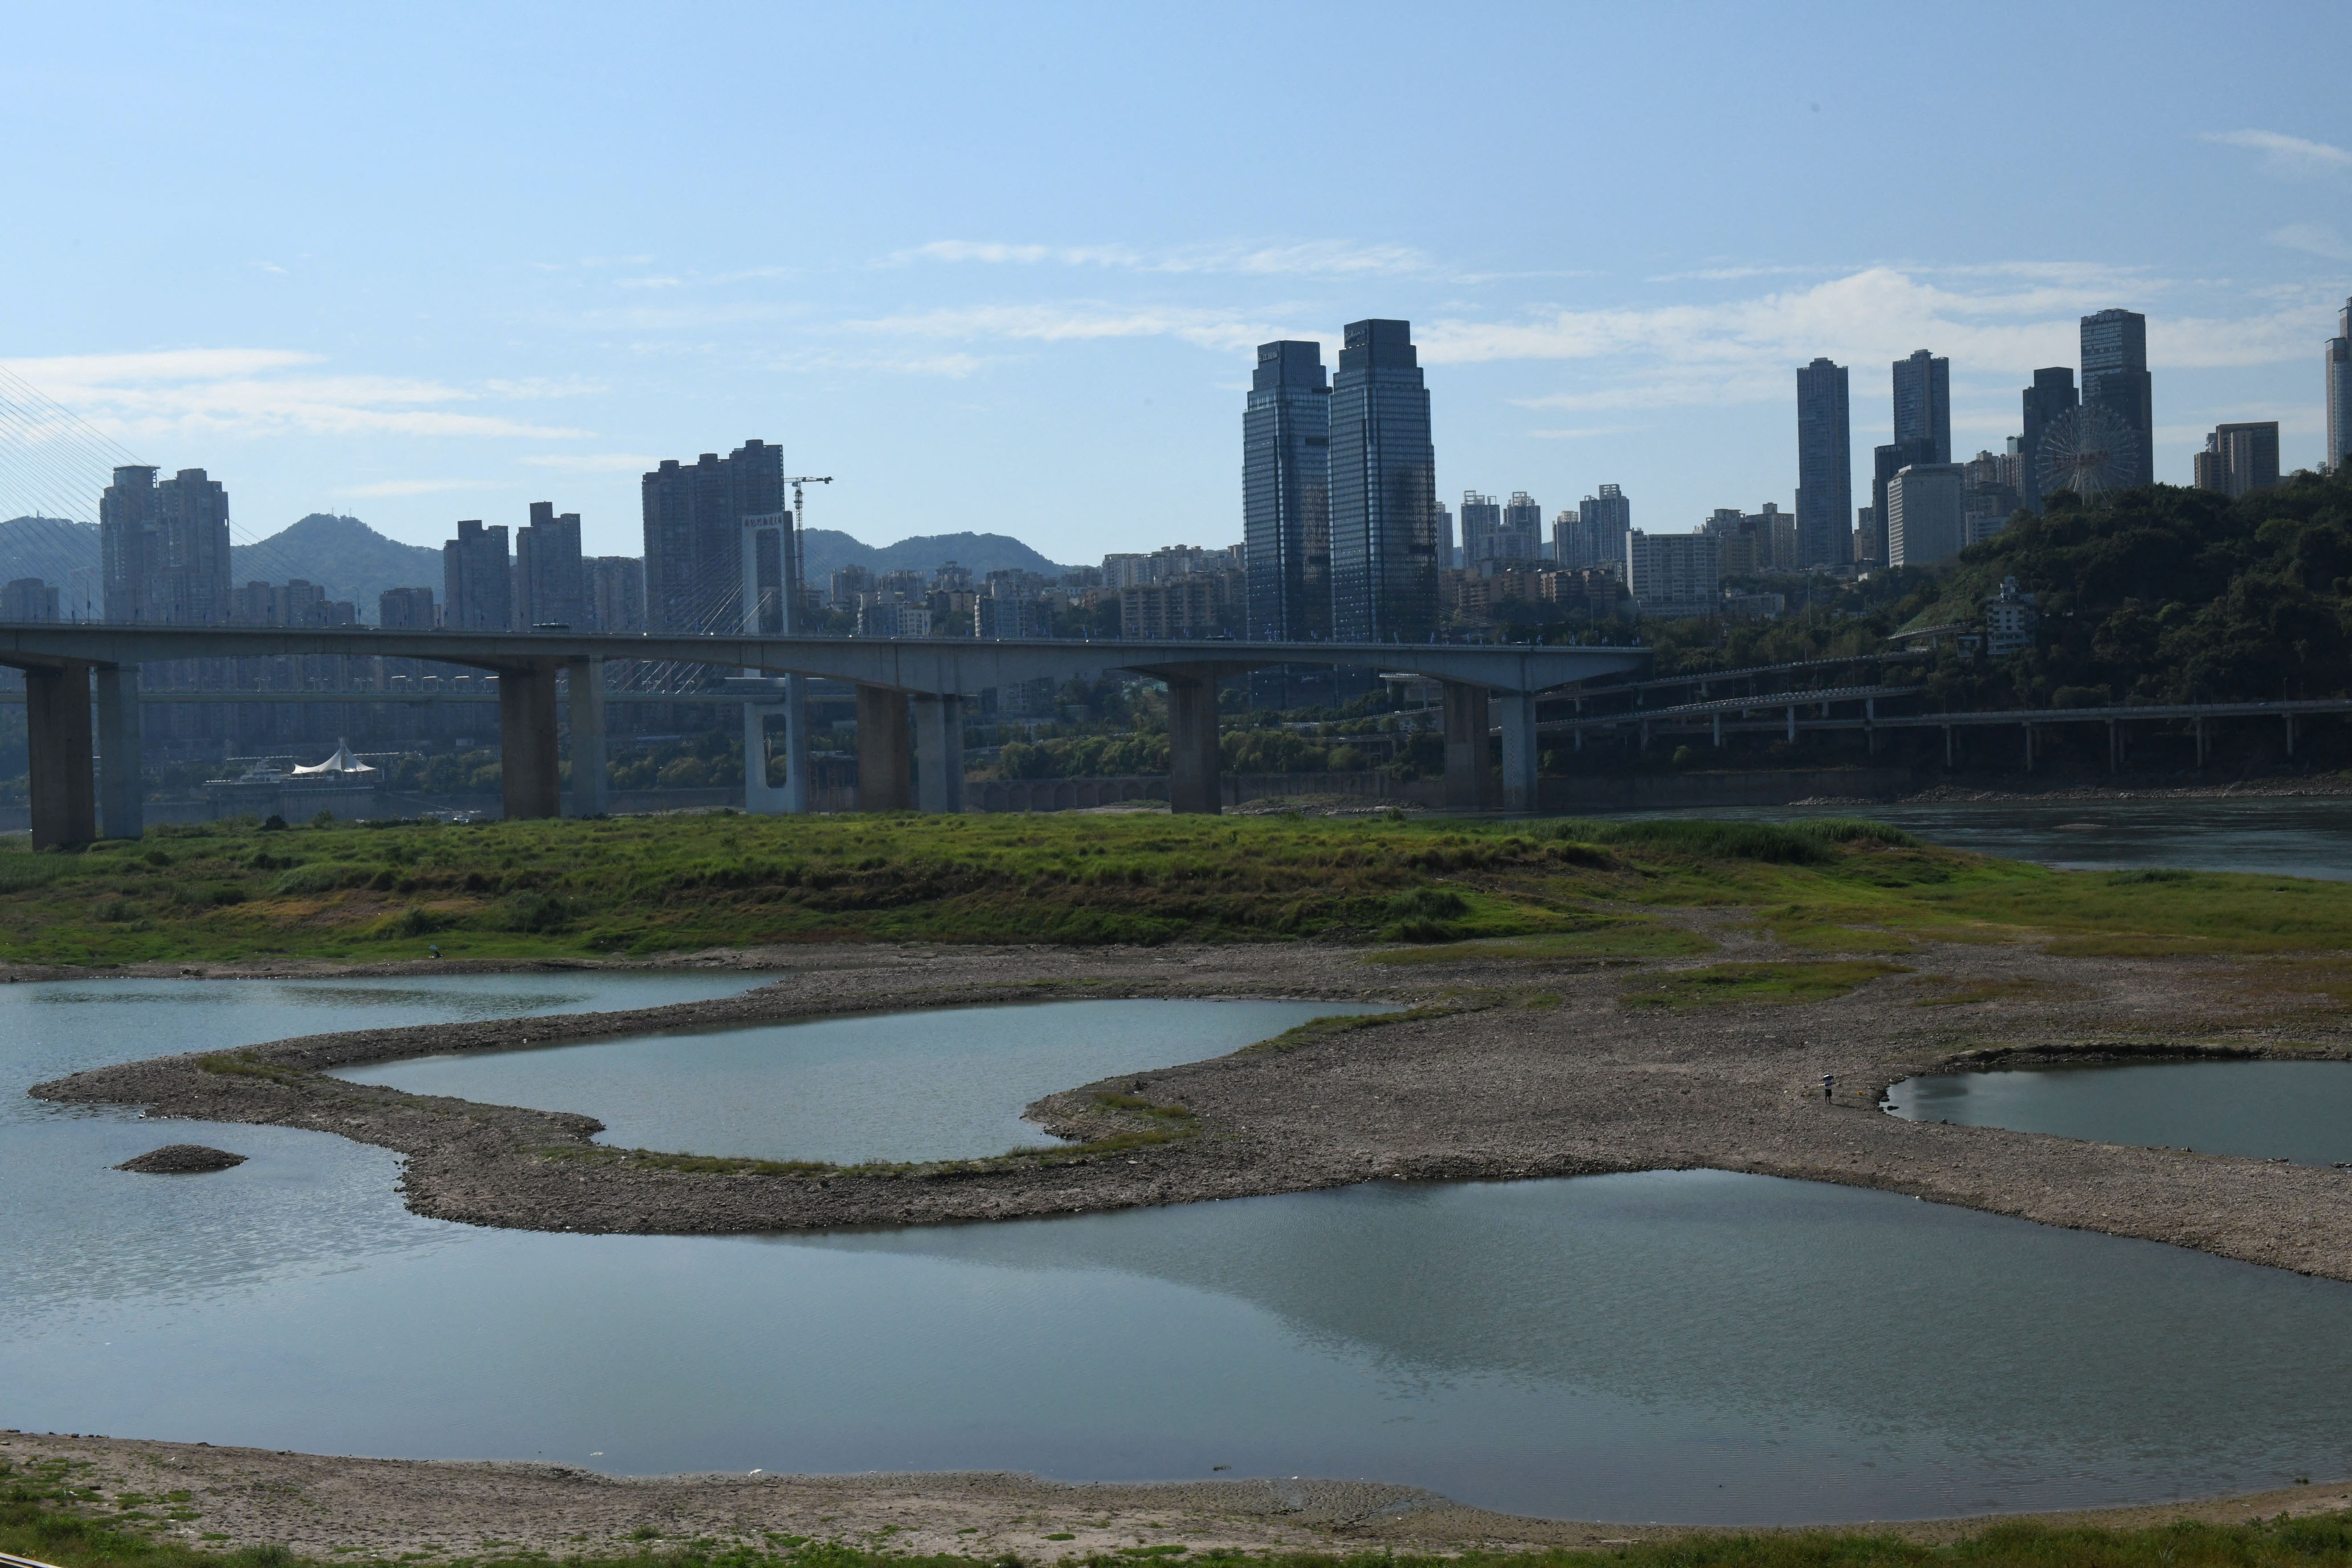 The exposed riverbed of Yangtze river in Chongqing